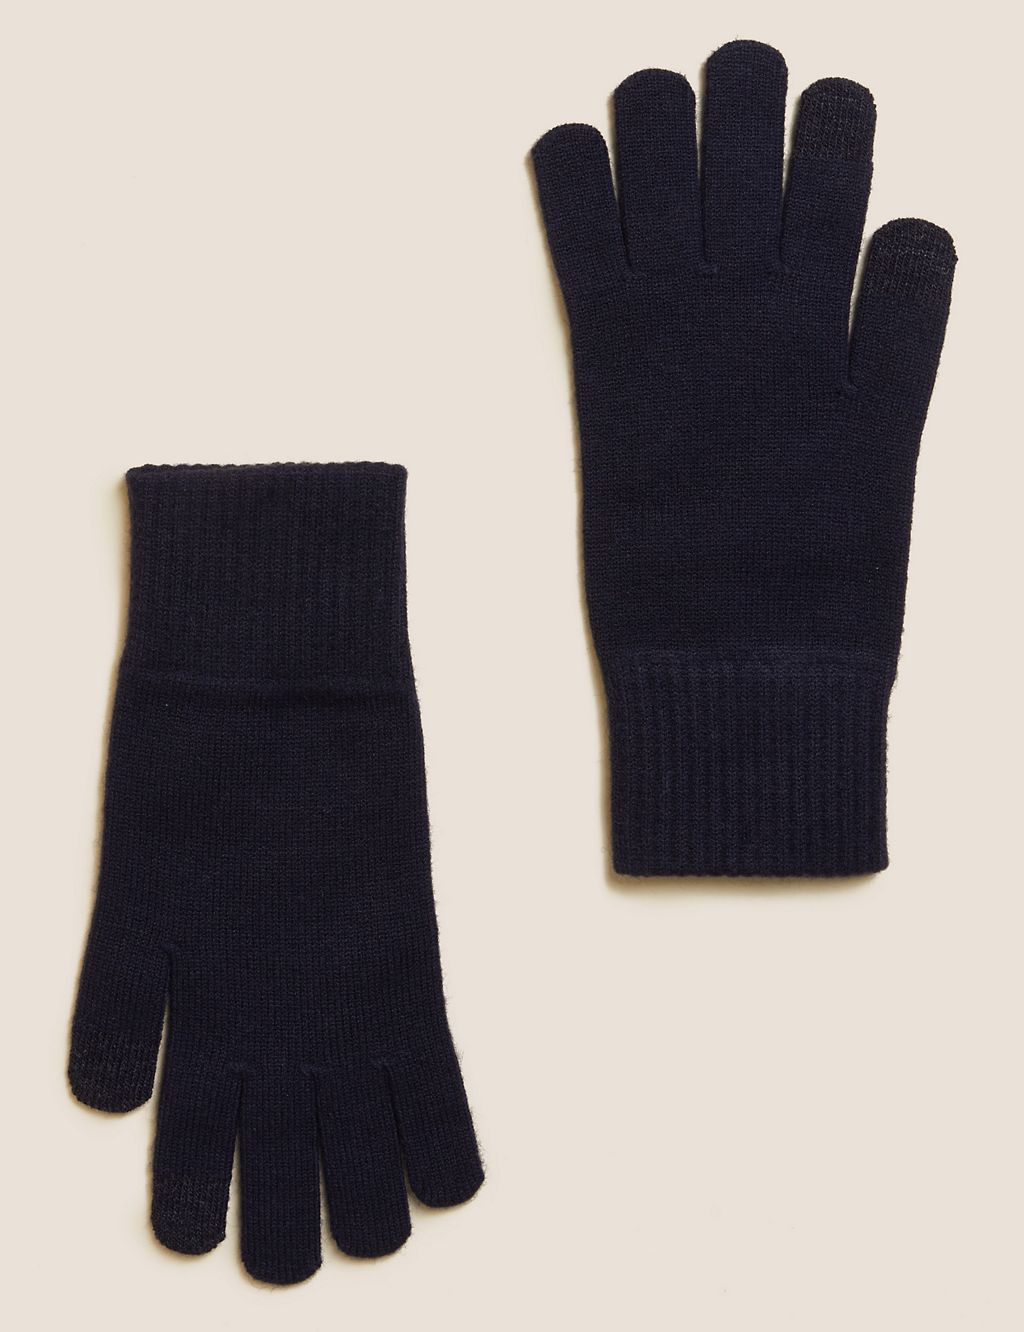 Knitted Touchscreen Gloves 1 of 1